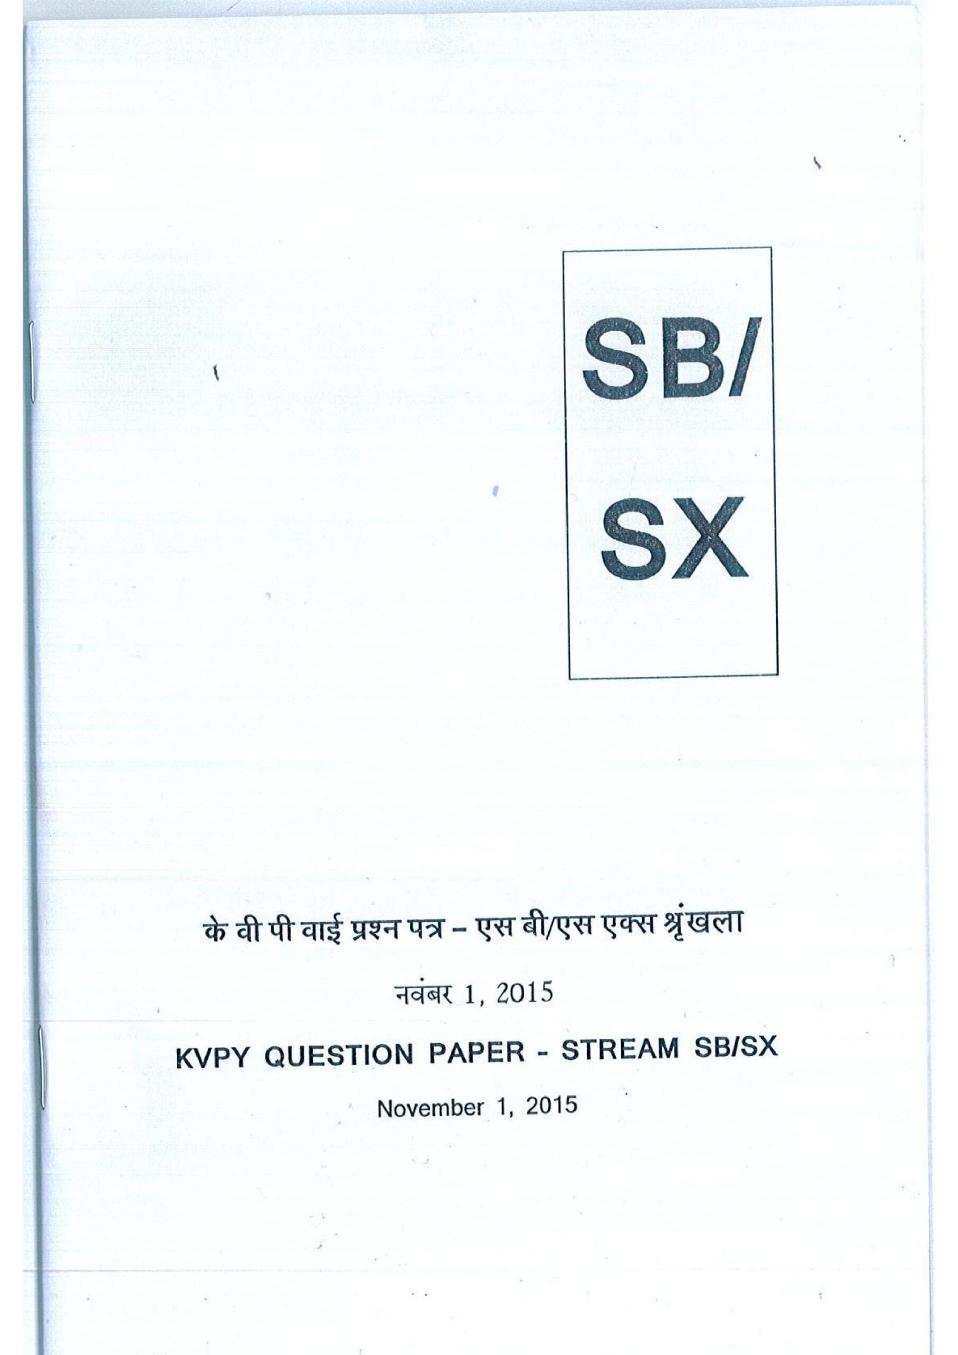 KVPY 2015 Question Paper with Answer Key for SB/SX Stream (Hindi Version) - Page 1